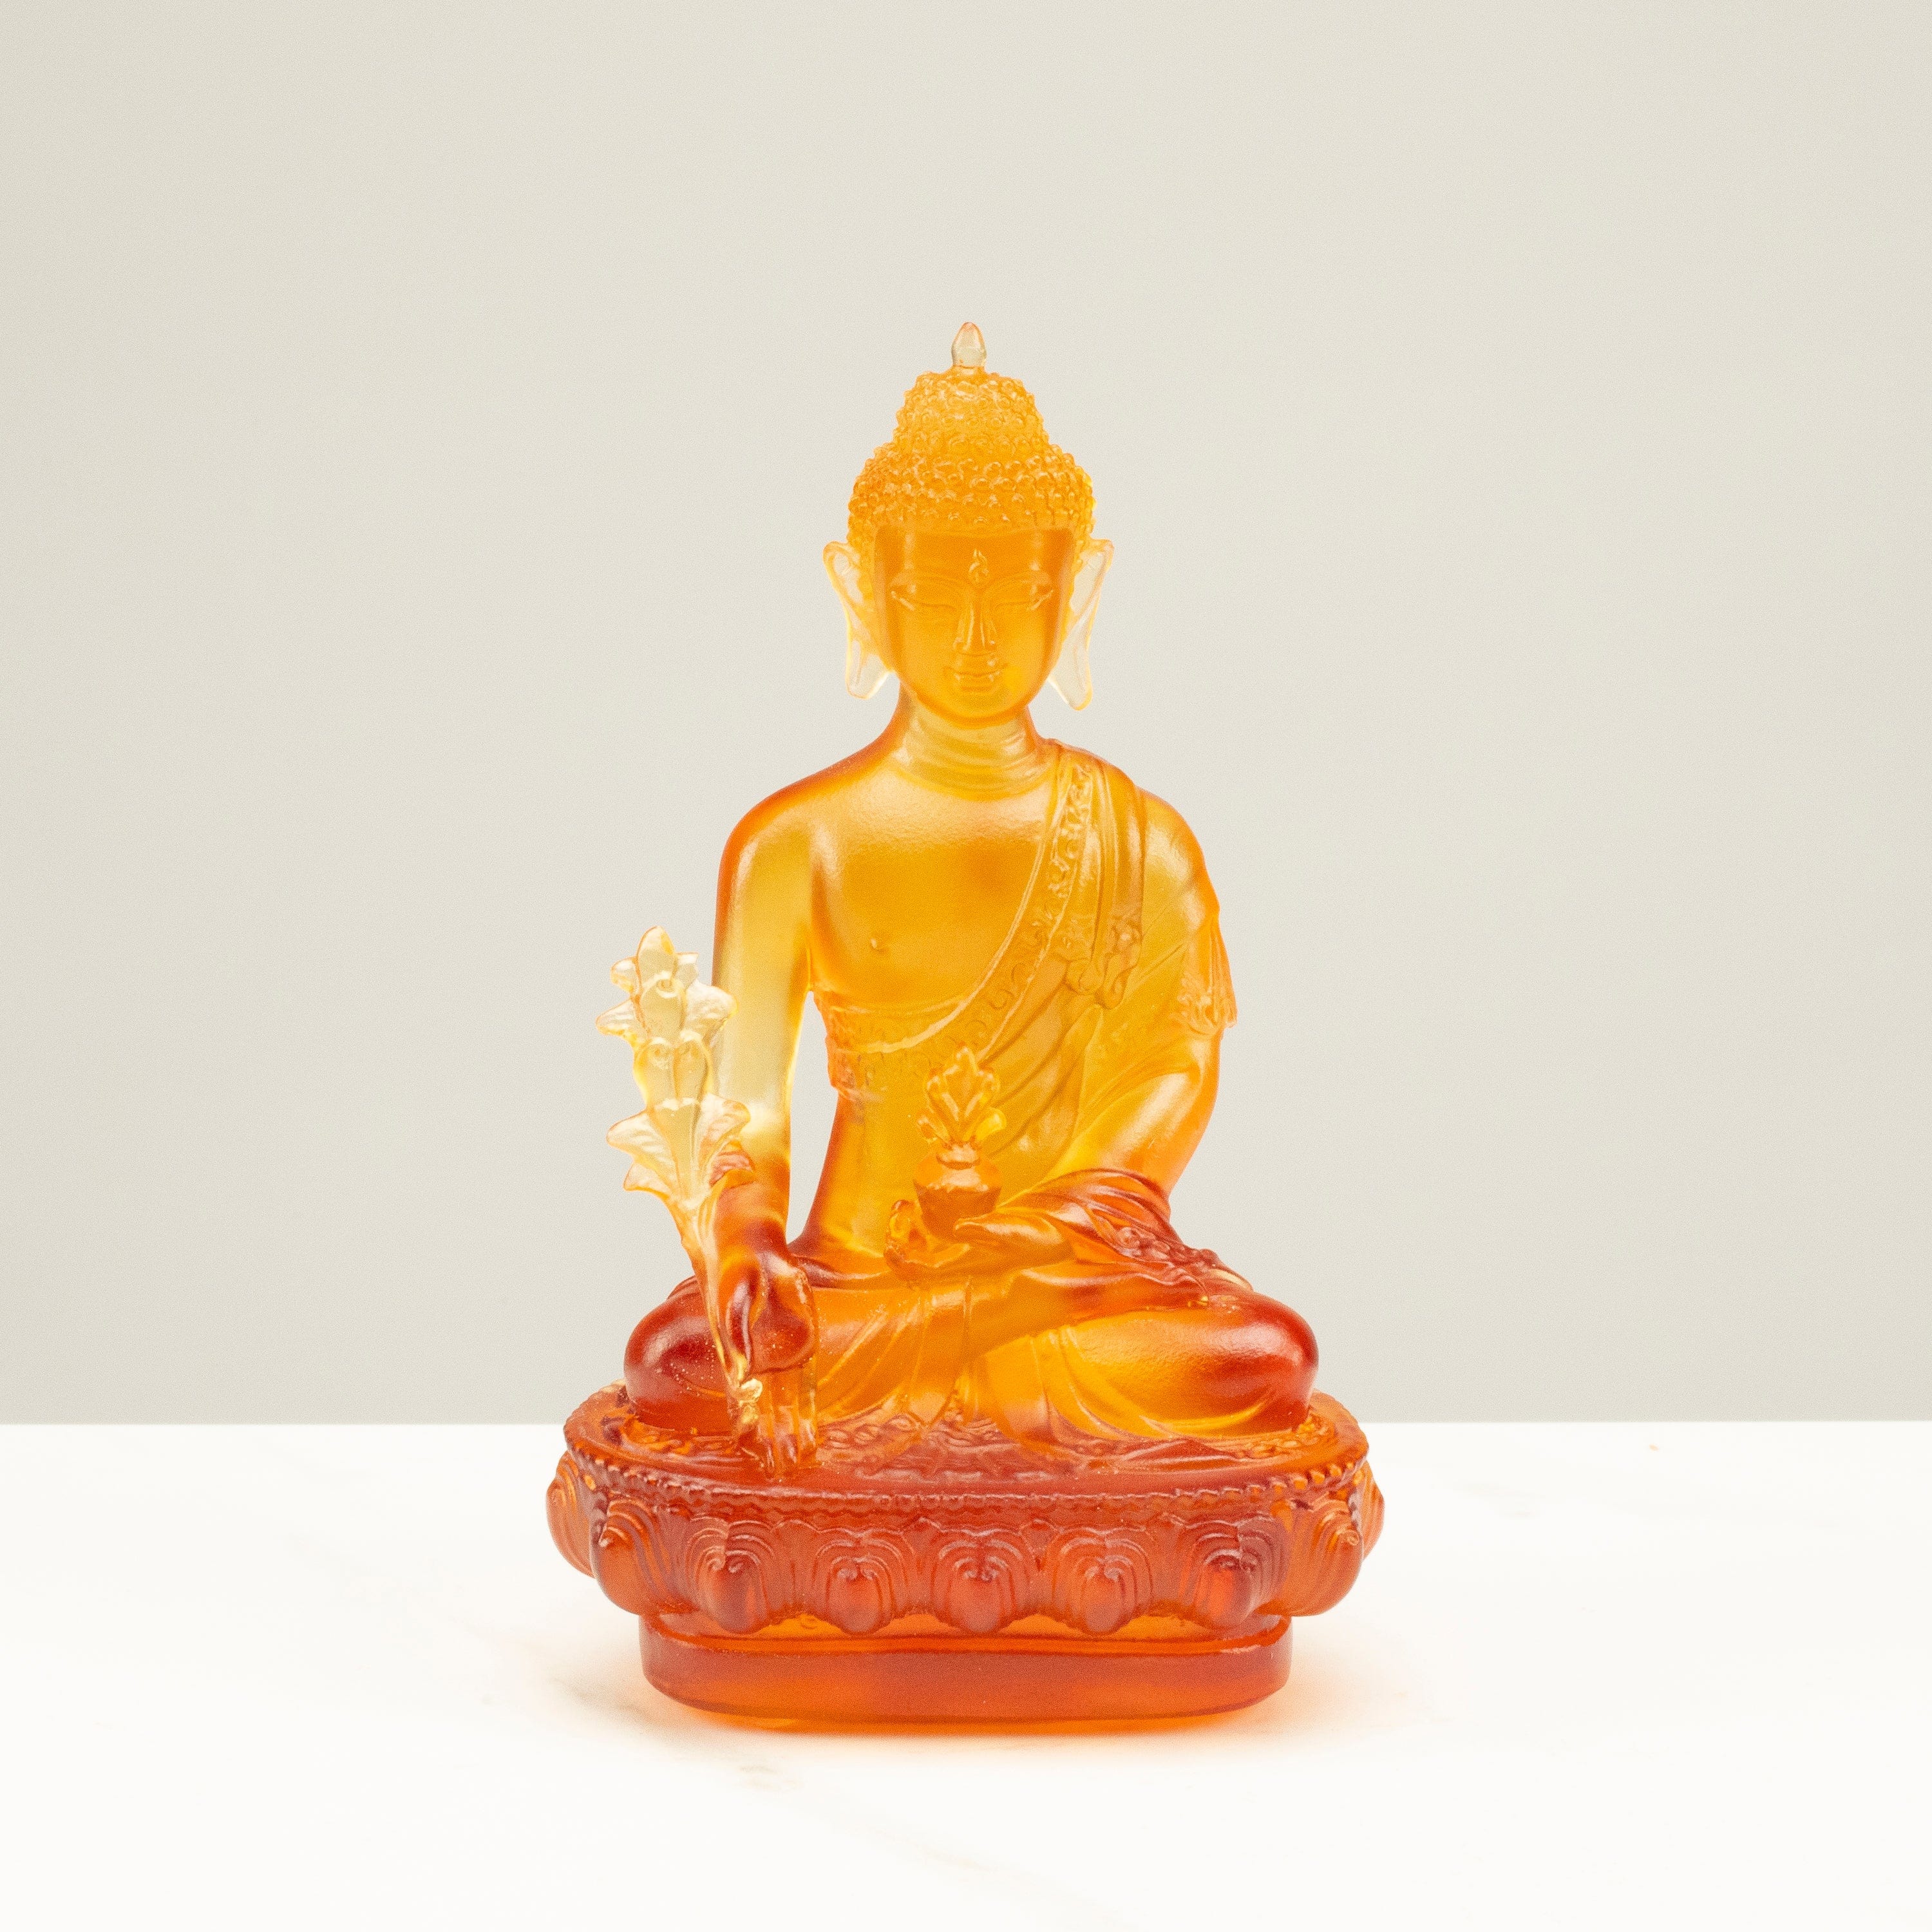 Kalifano Crystal Carving Divine Golden Guan Yin Crystal Carving - A Symbol of Compassion and Protection CRB110-OR